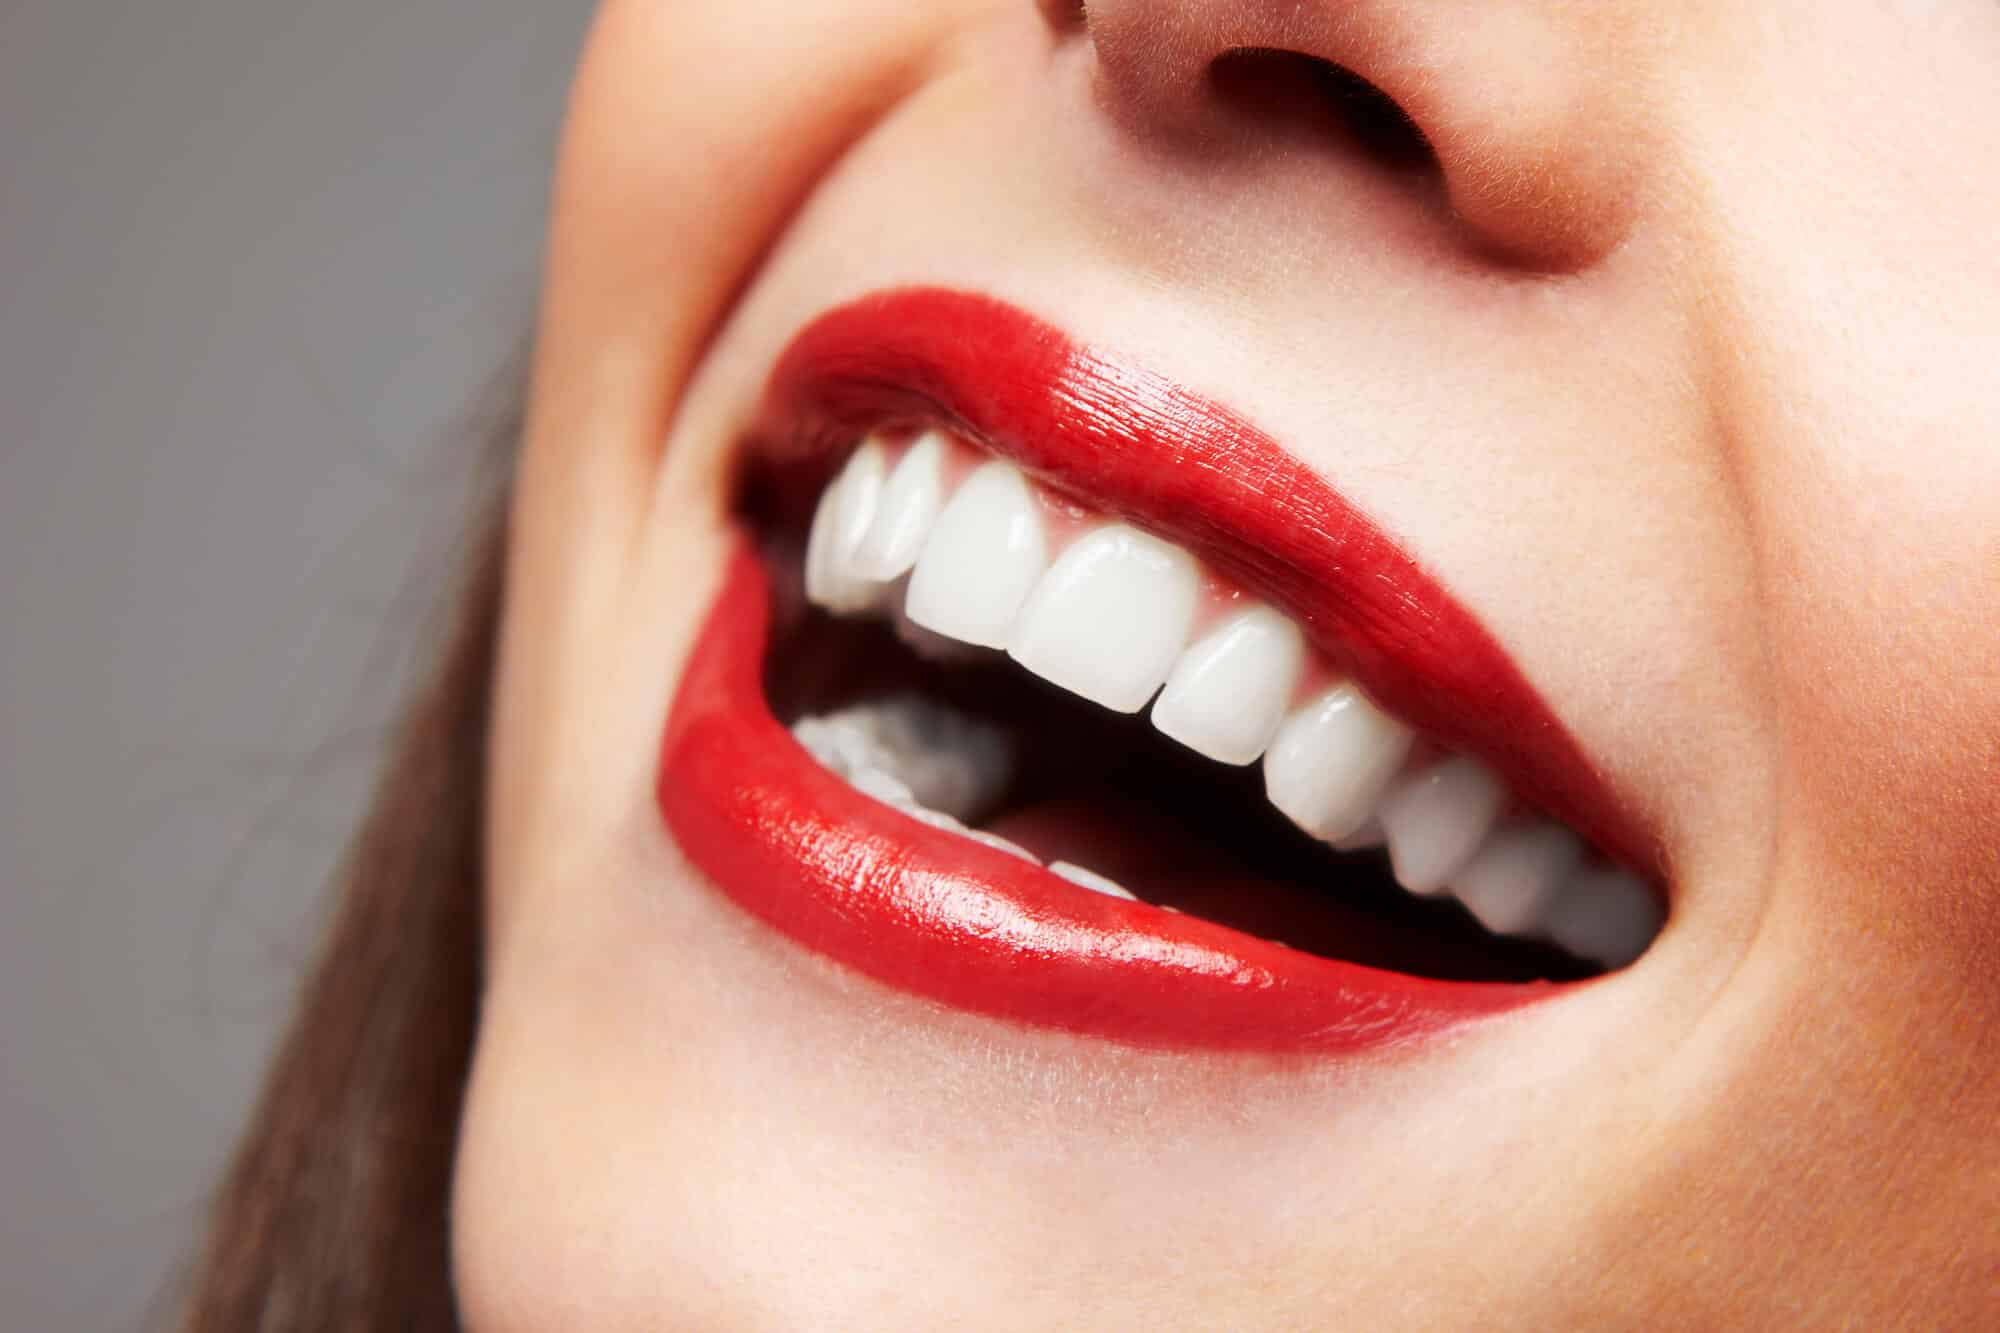 Know how to improve healthy teeth and gums.